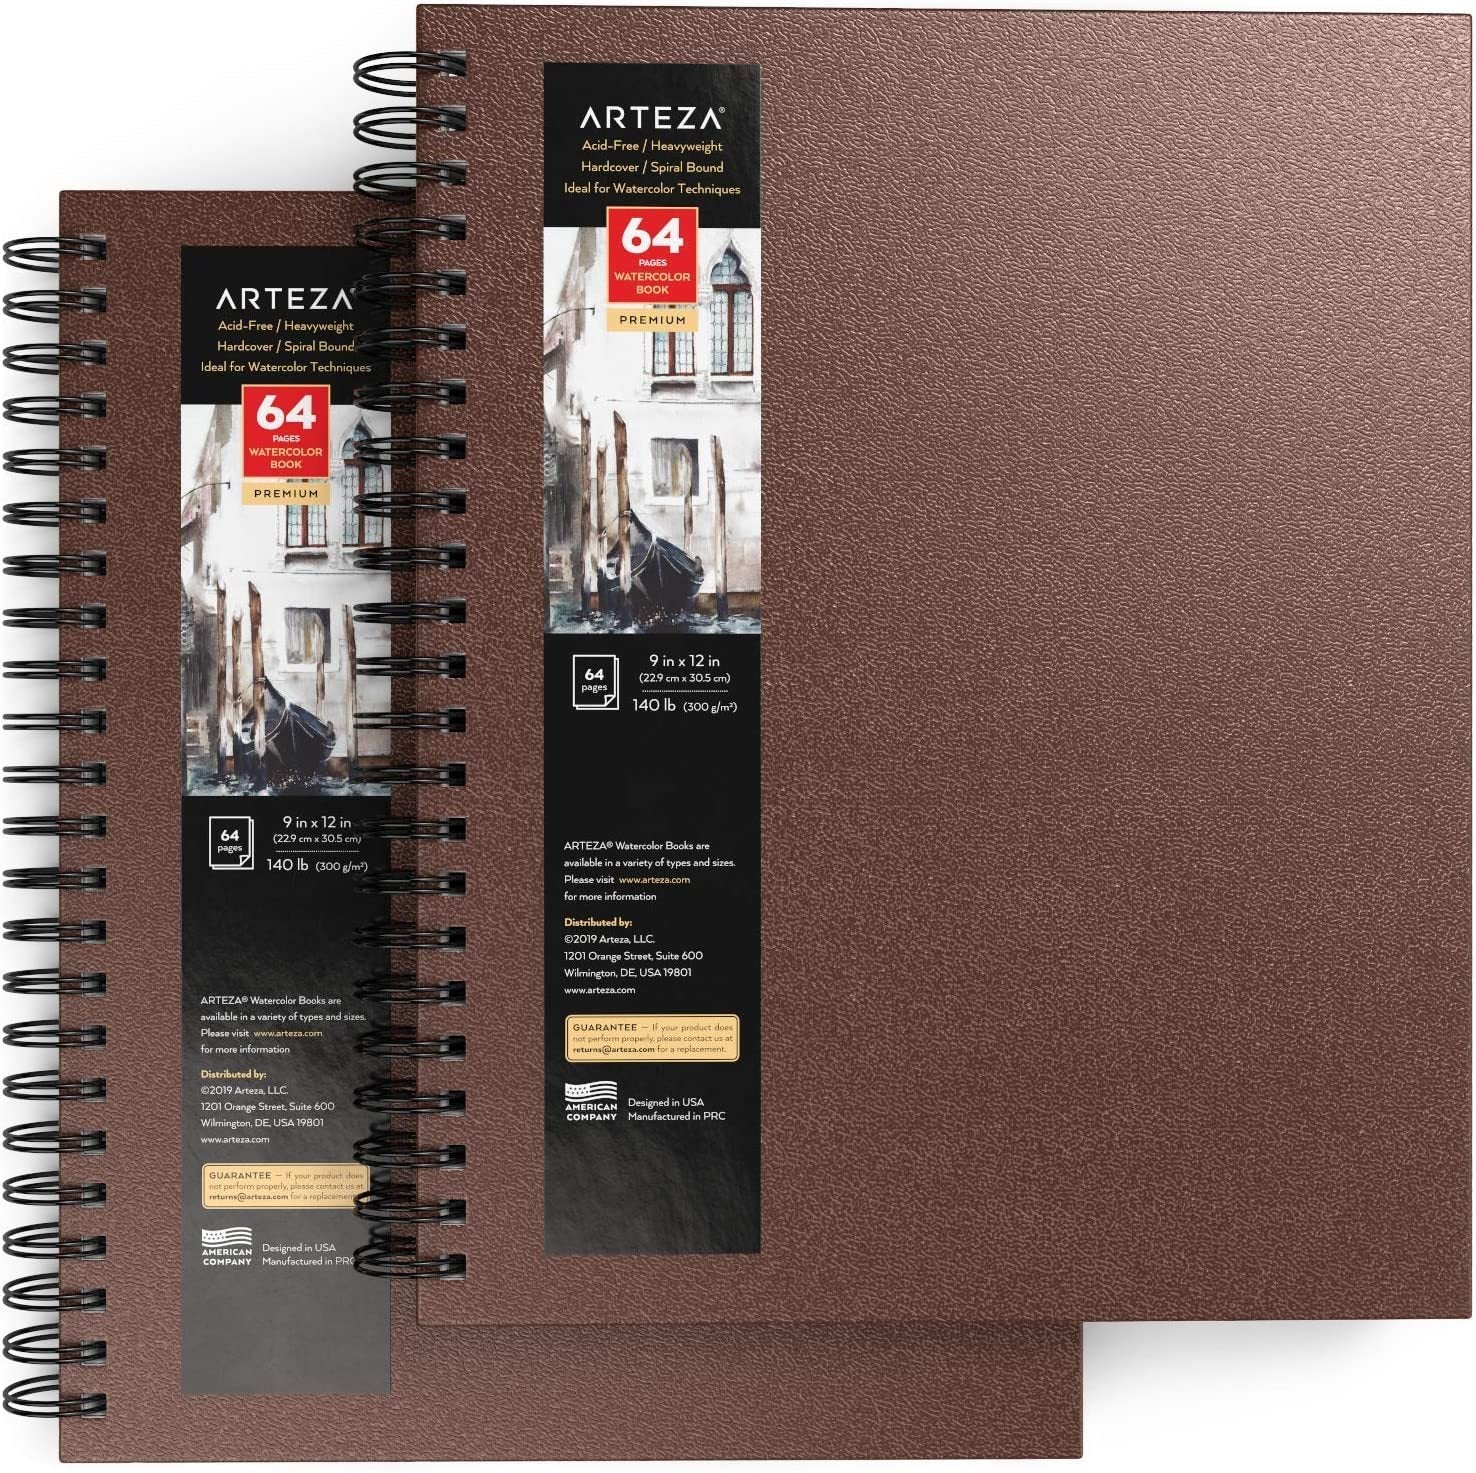 Watercolor Book, Beige Hardcover, 8.25 x 8.25, 68 Pages - Pack of 2